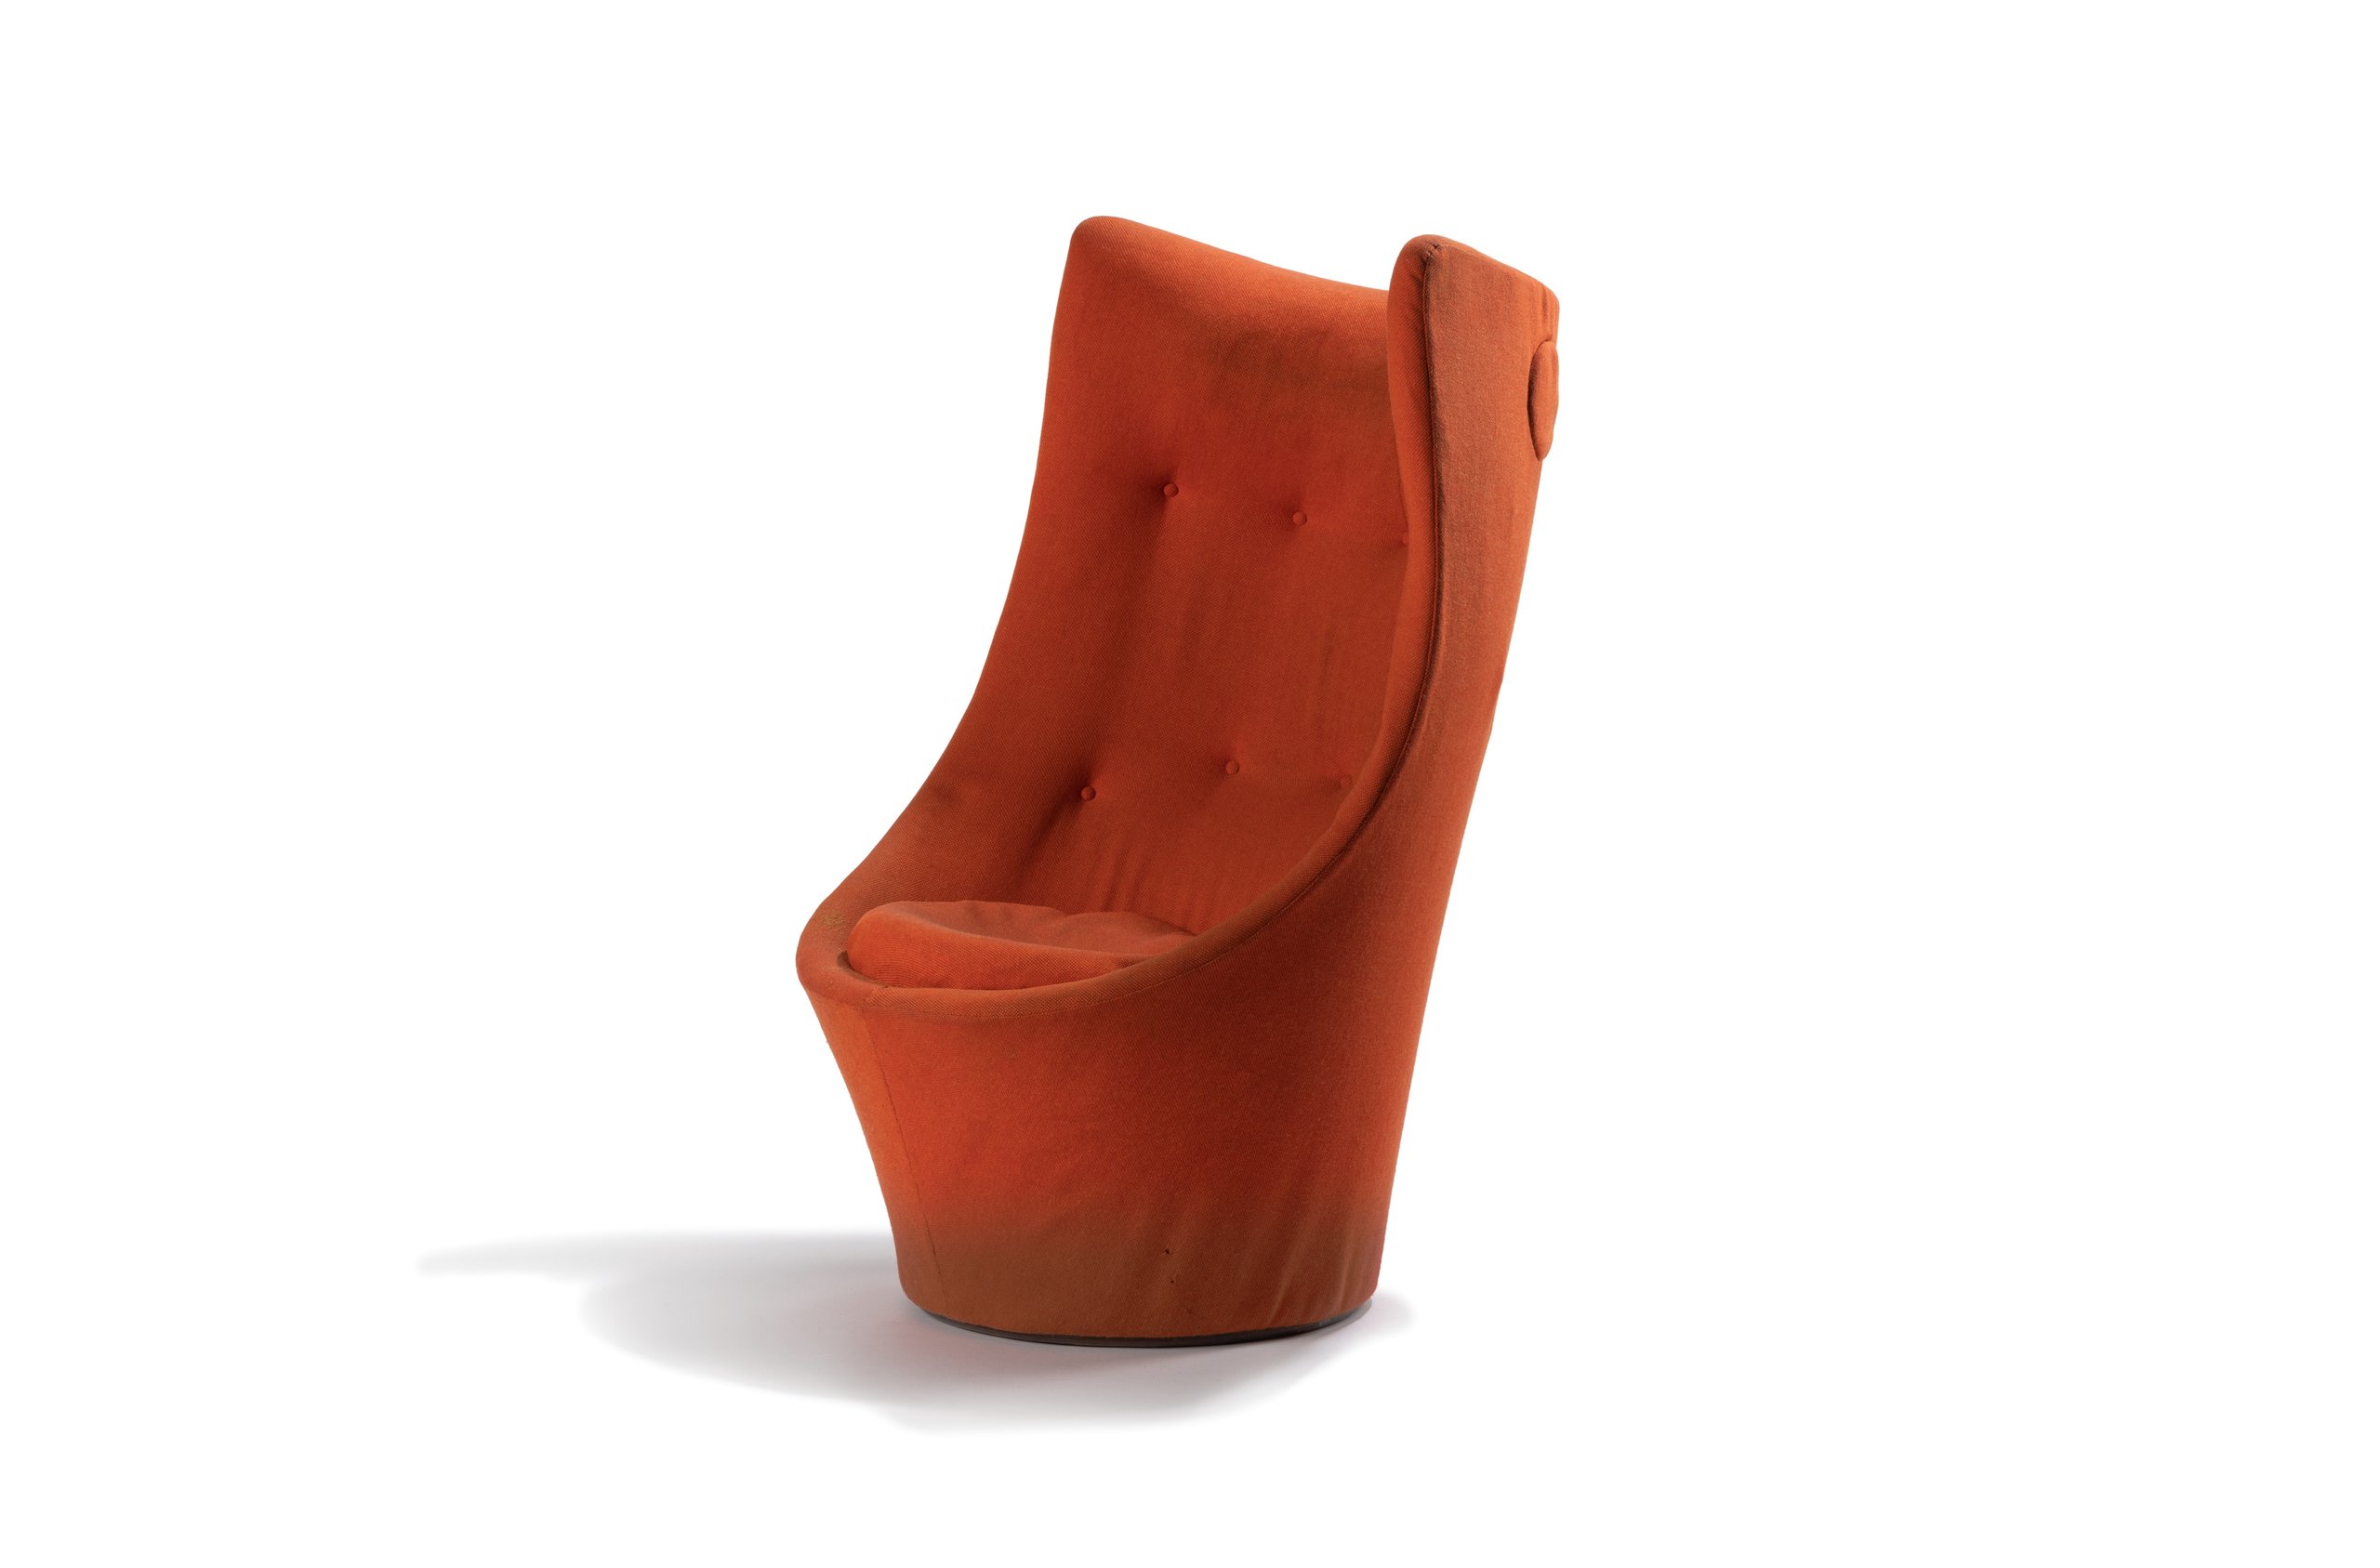 'Expo mark II sound chair' by Grant and Mary Featherston